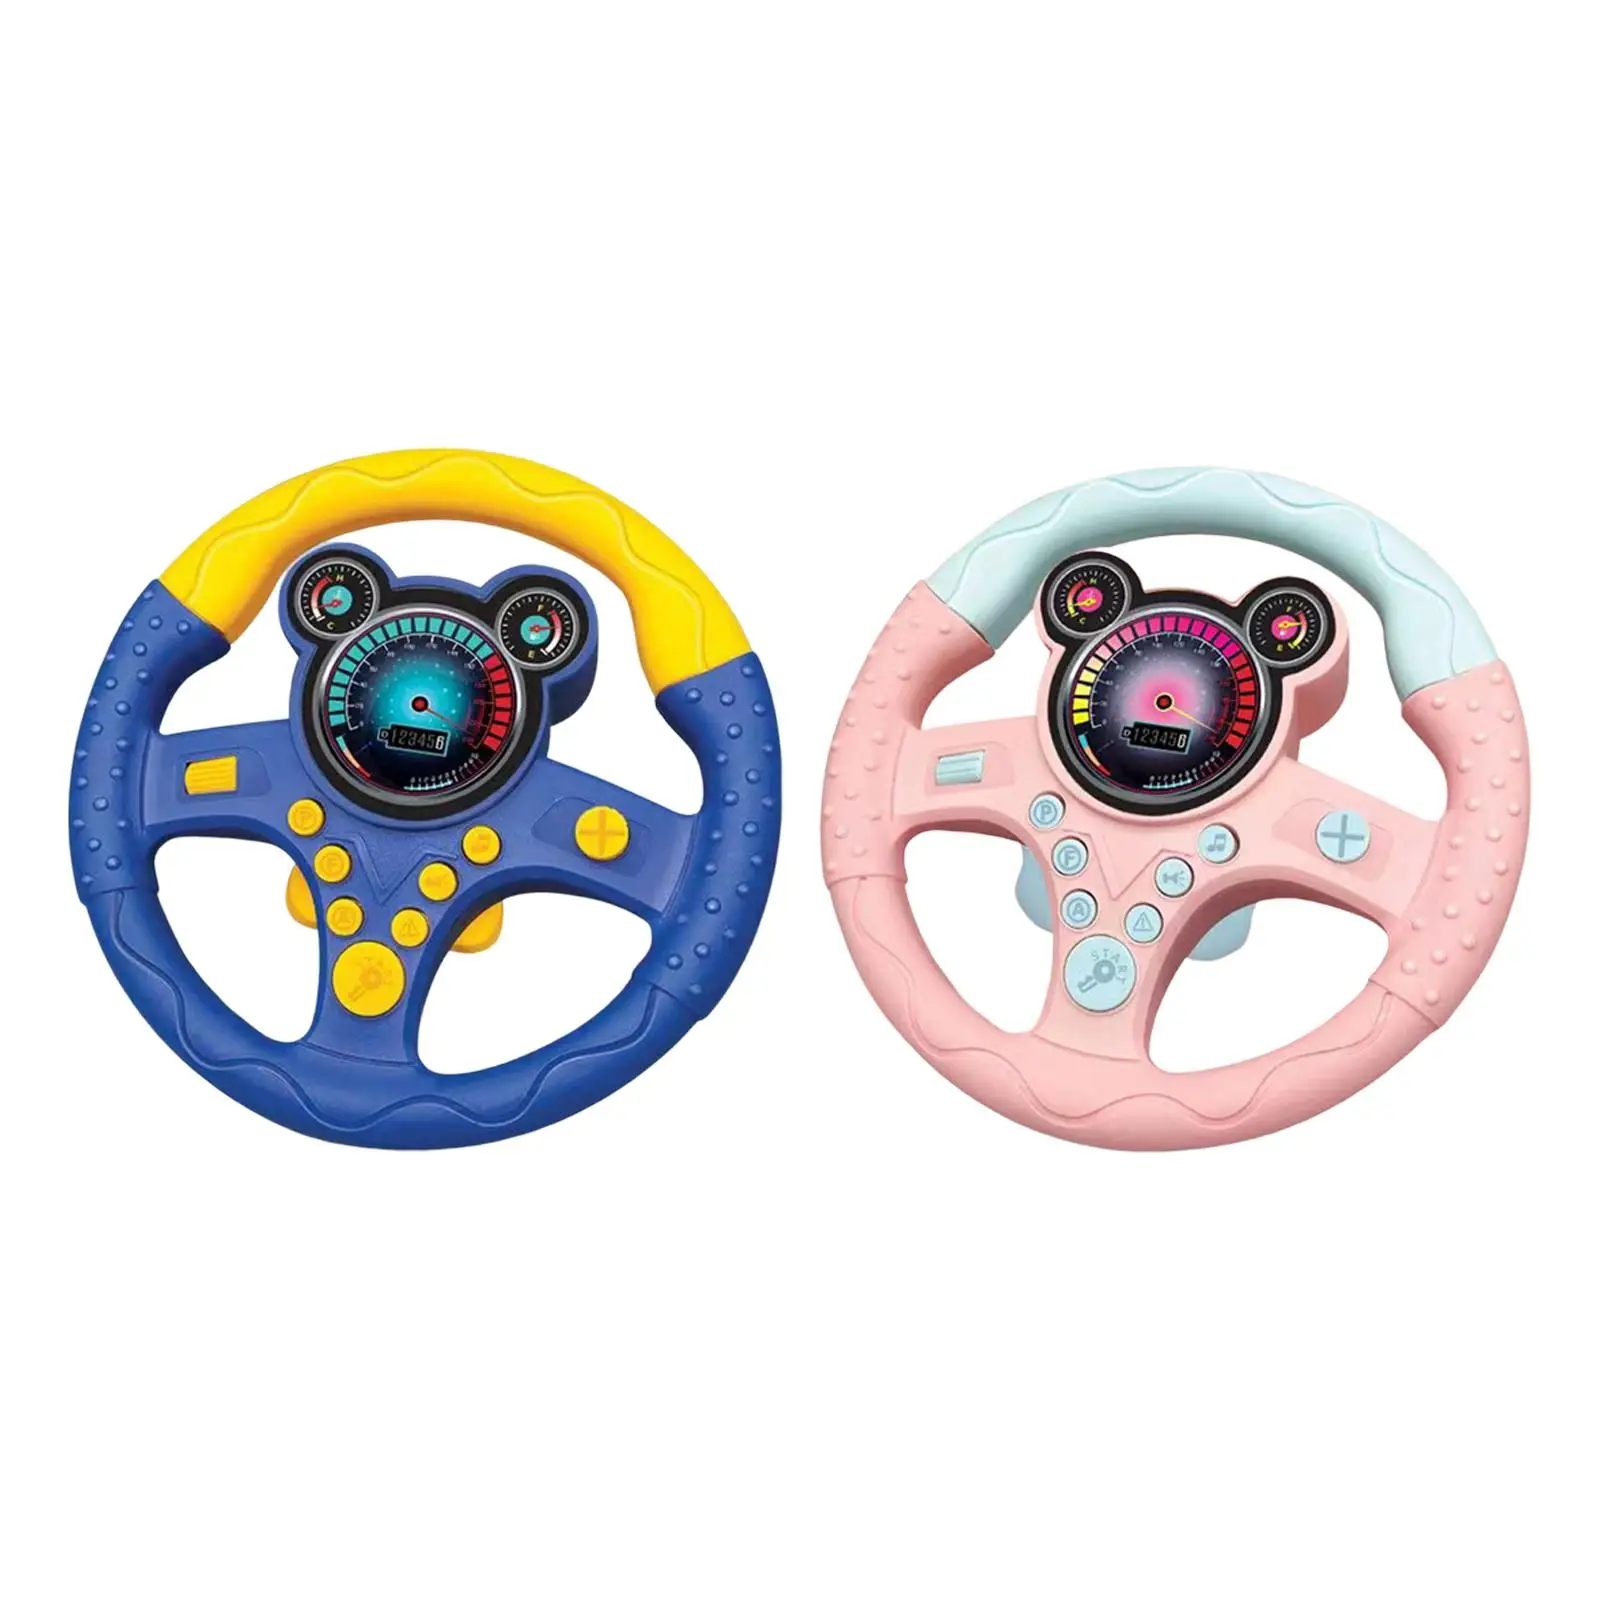 Simulation Steering Wheel Toy Driving Kids Electric Wheel Toy Pretend Driving Toy for Outdoor Amusement Park Backyard Gifts